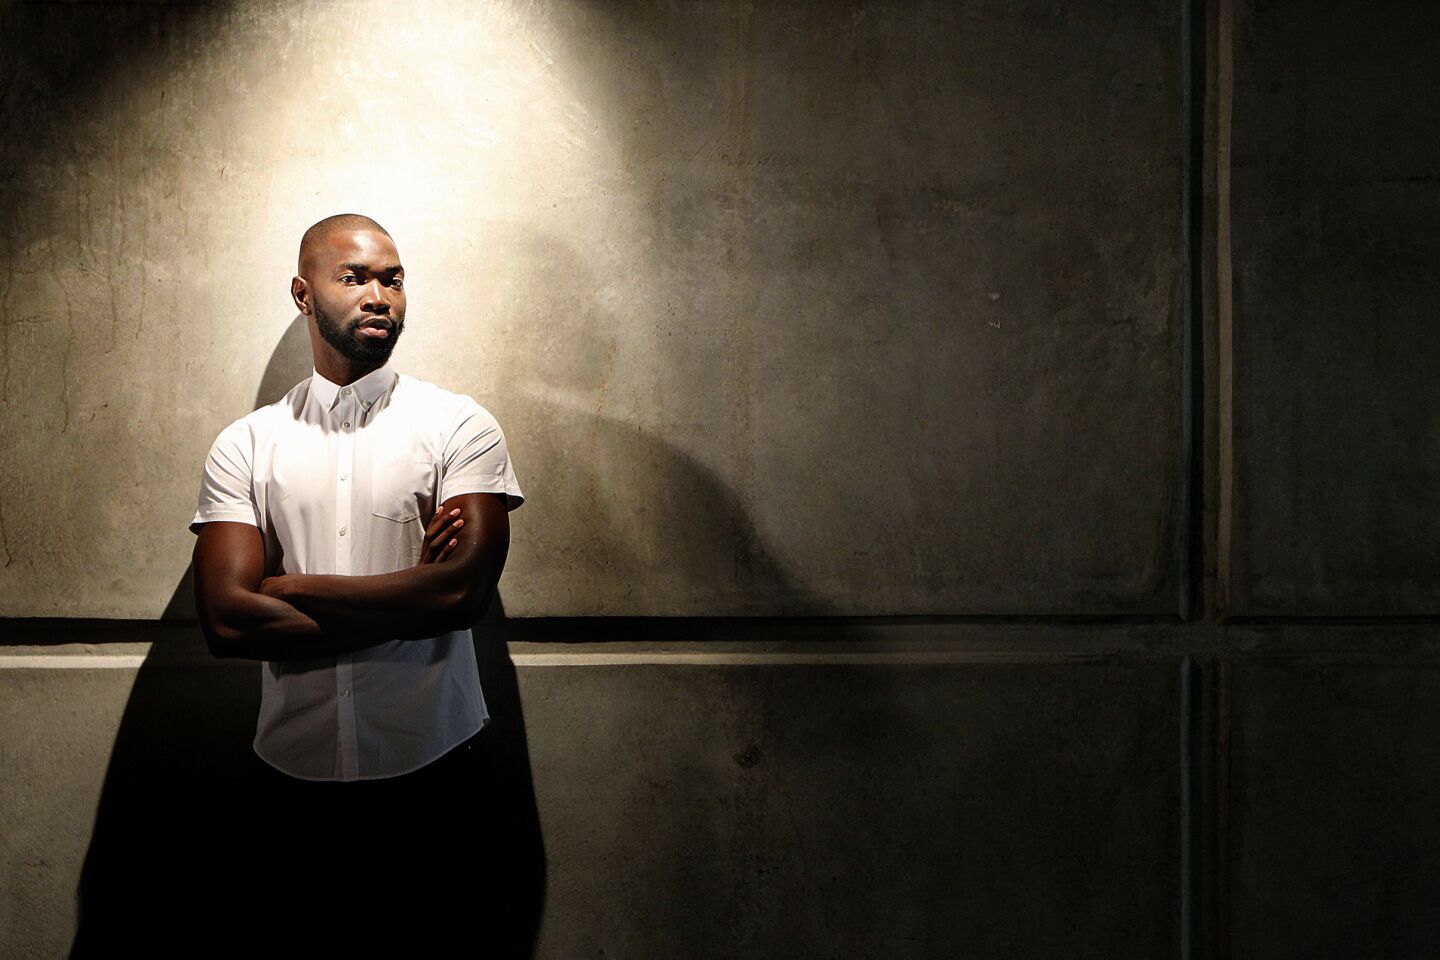 Arts and culture in pictures by The Times | Tarell Alvin McCraney